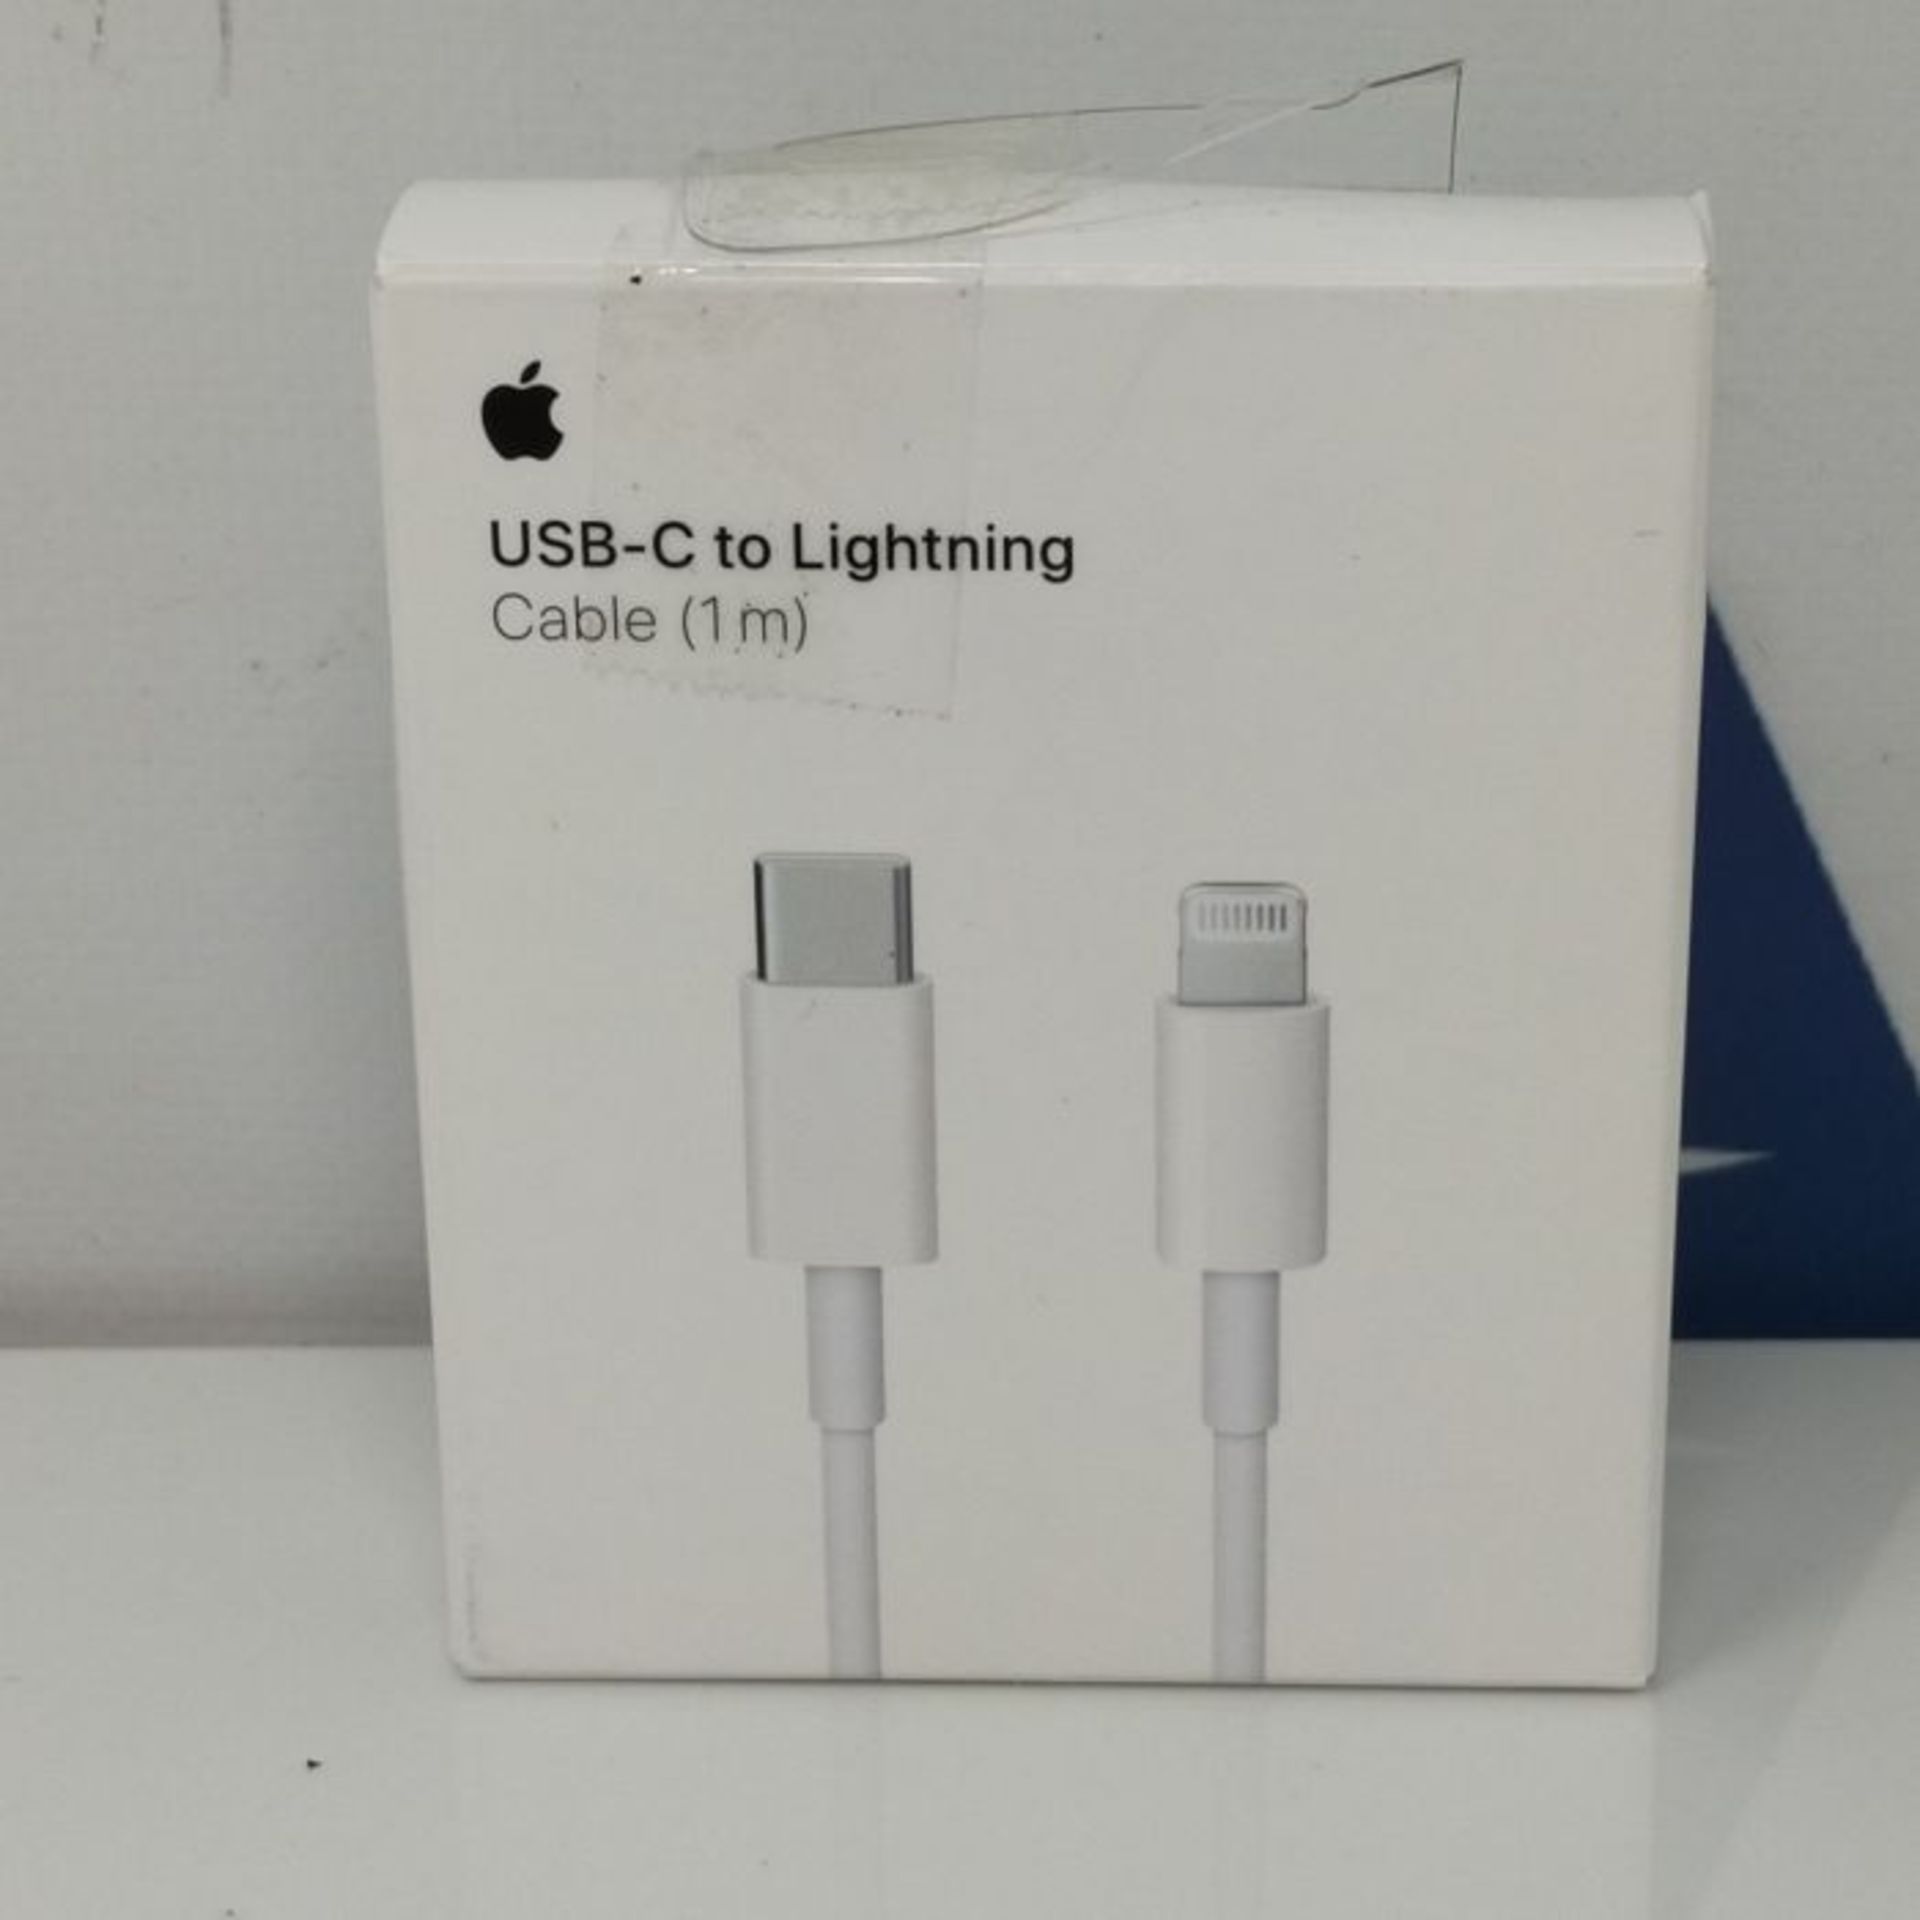 Apple USB-C to Lightning Cable (1m) - Image 3 of 3